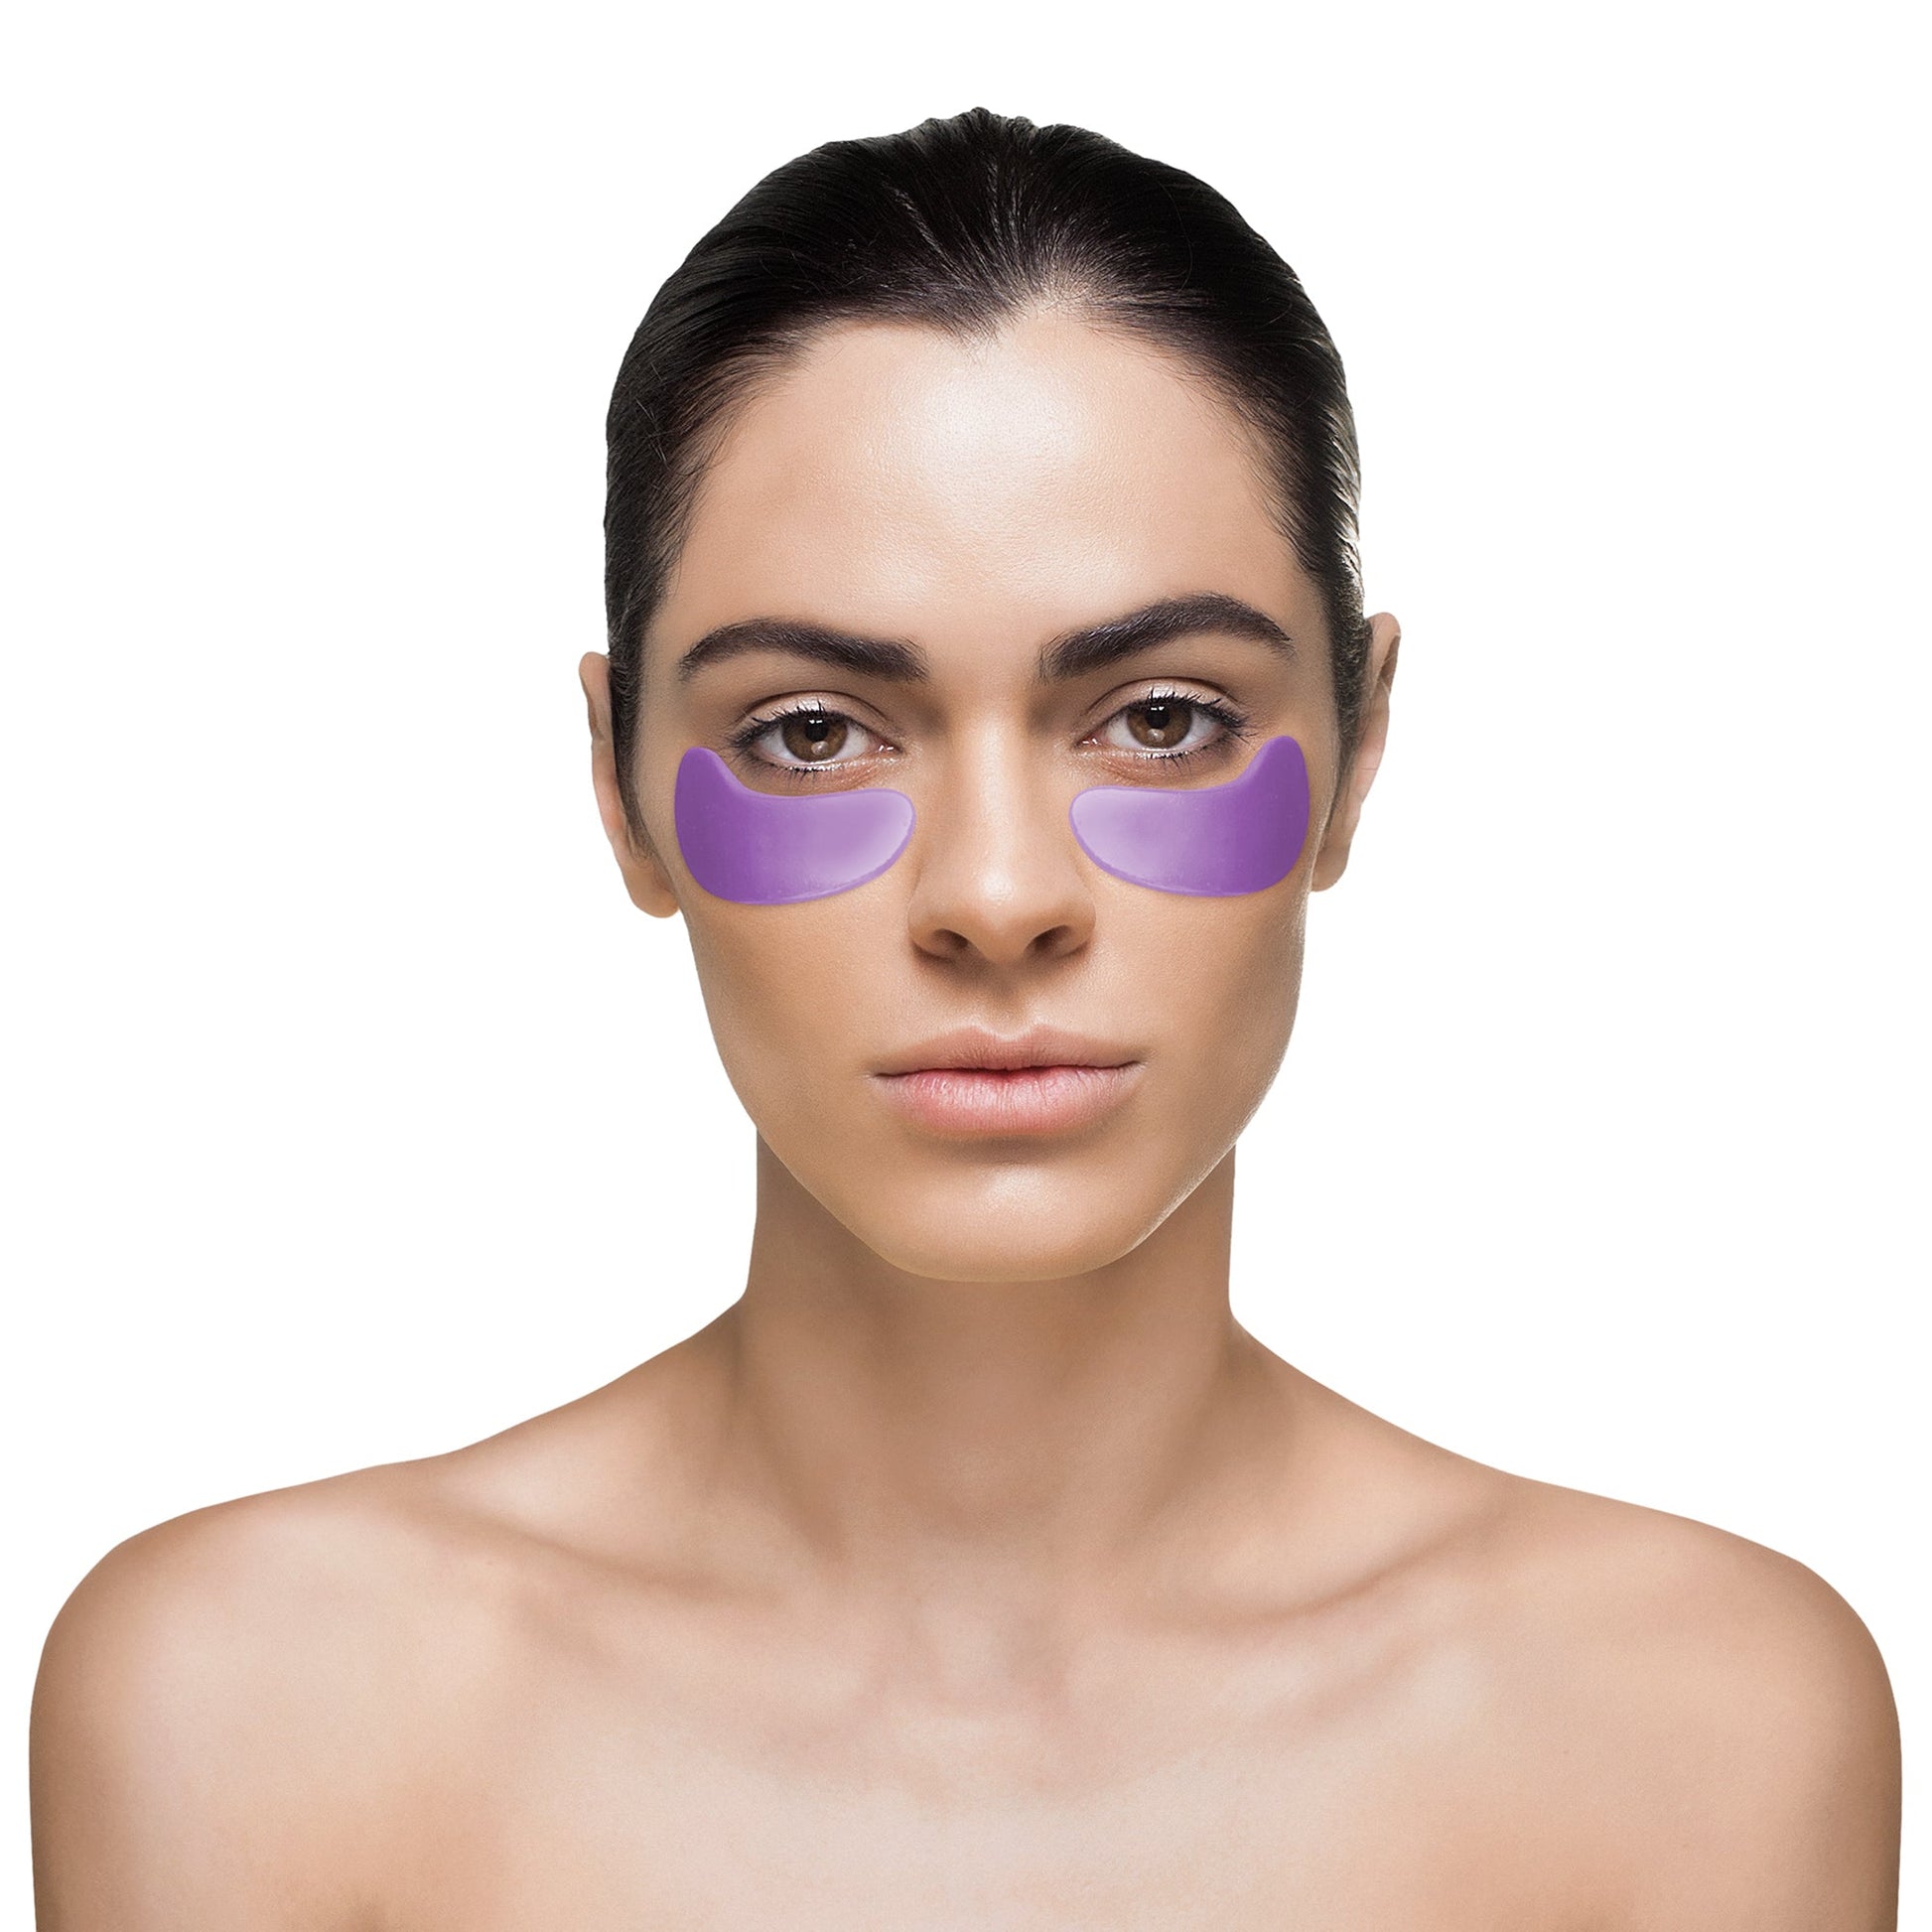 Buy Online Best Amethyst Eye Mask | Buy innovative clinical skincare products - TOPBODY